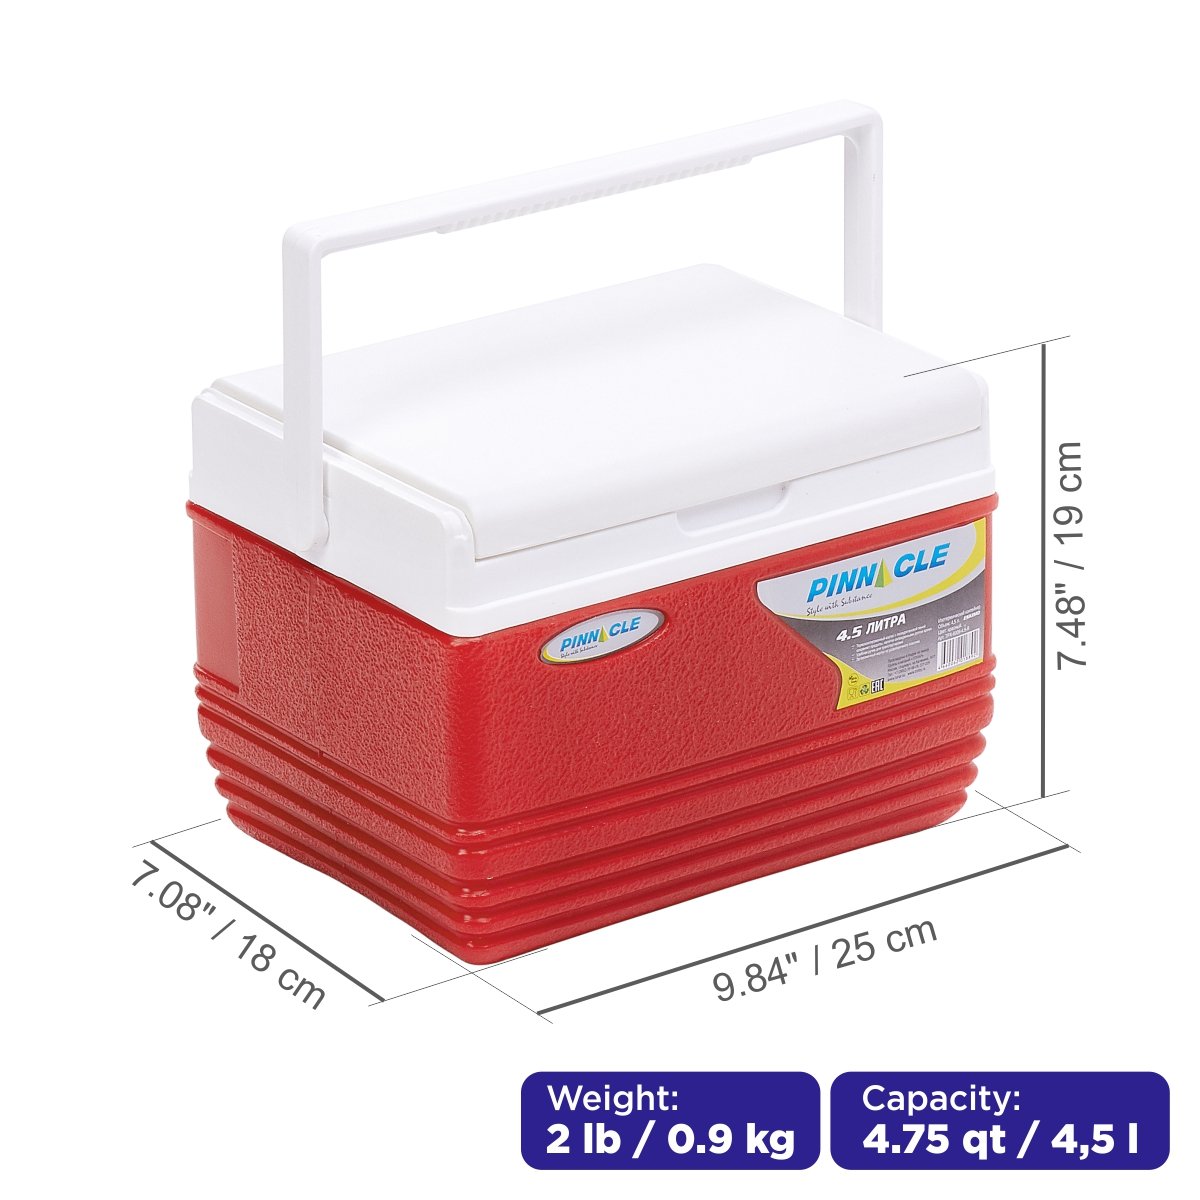 Eskimo Portable Hard-Sided Ice Chest for Camping, 4 qt, Red is 10 inches long, 7 inches wide and 7.5 inches high, weighing 2 lbs